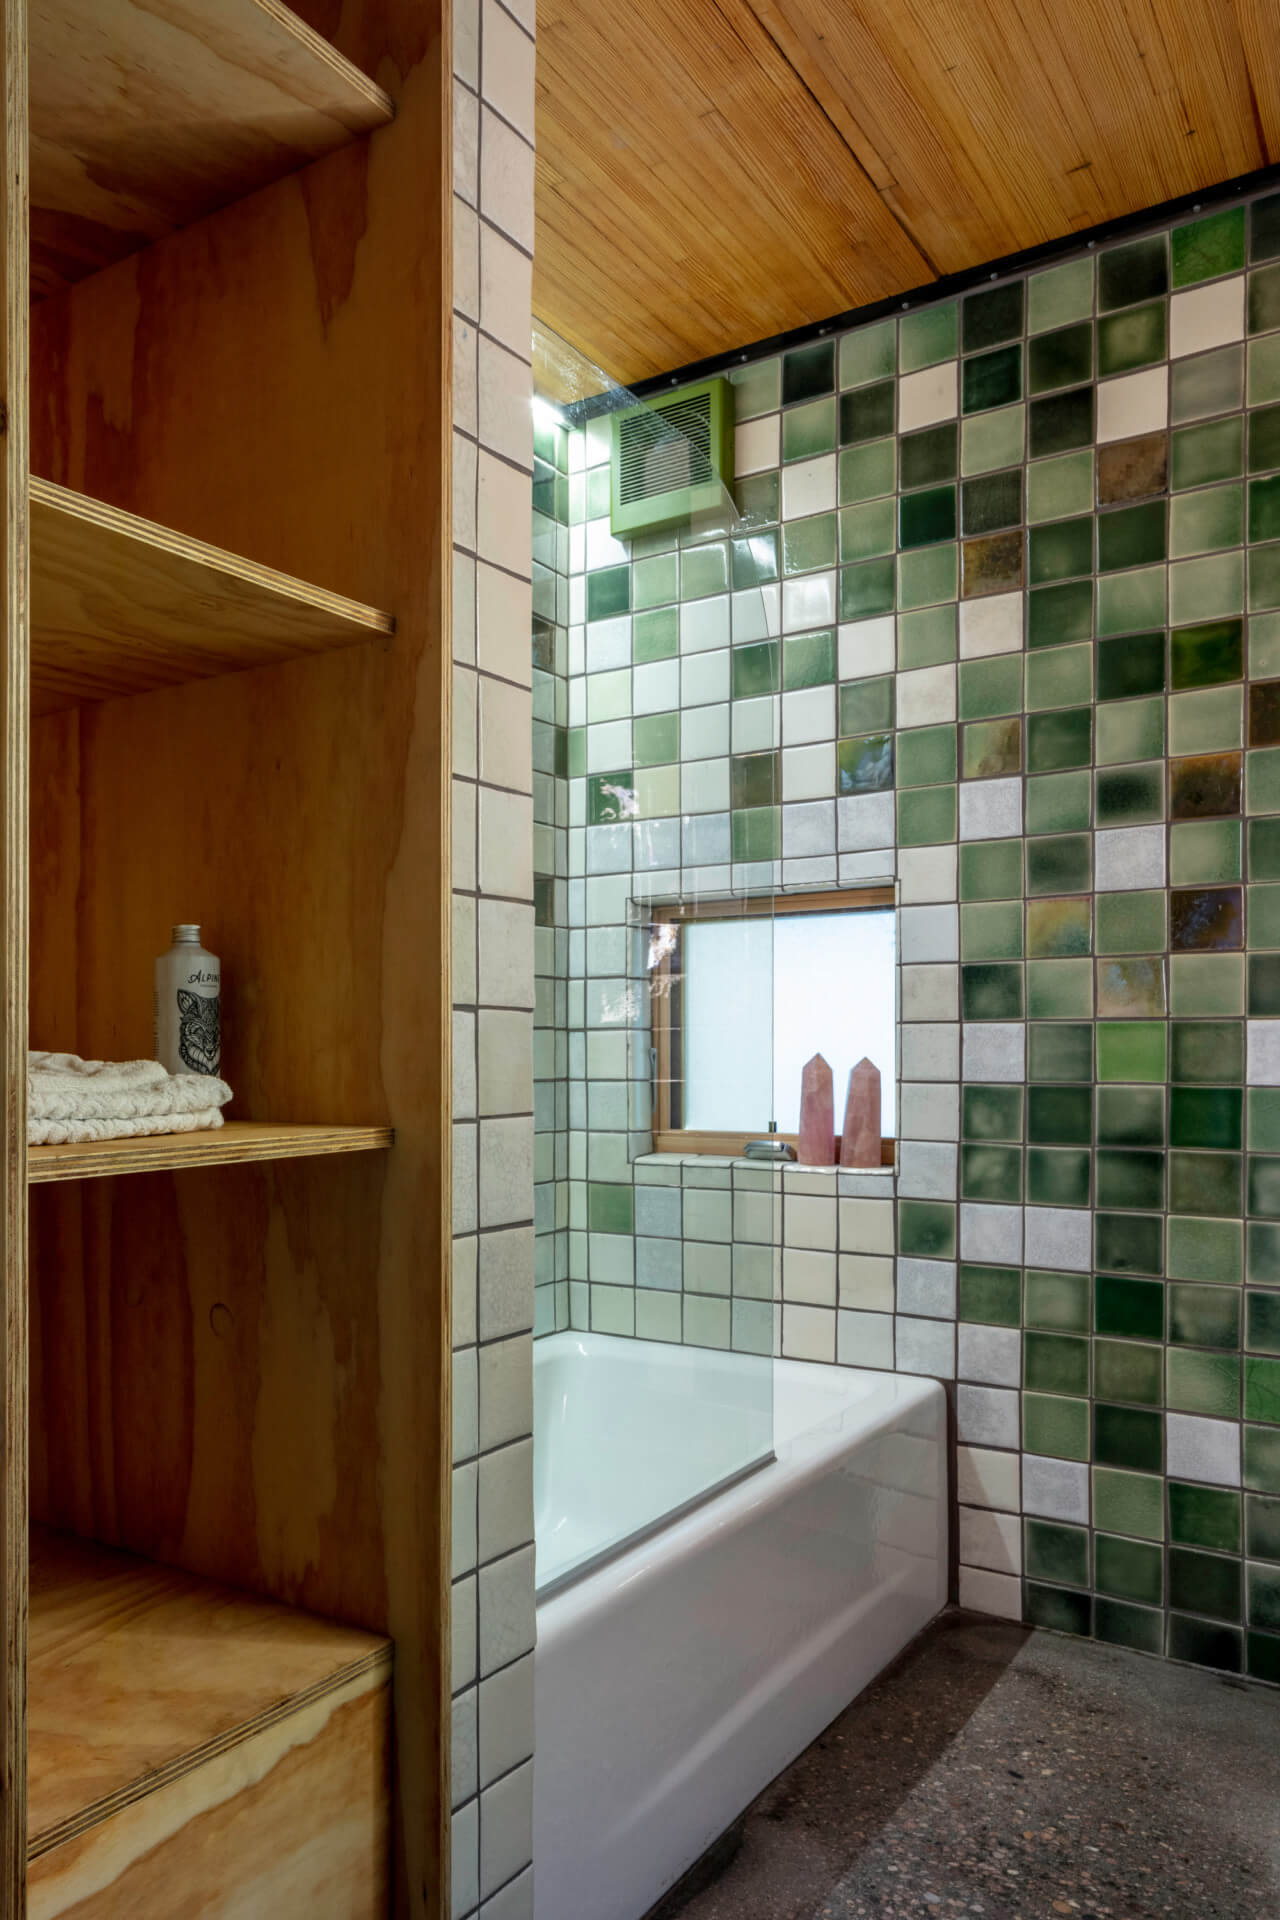 a bathroom wrapped in green tile